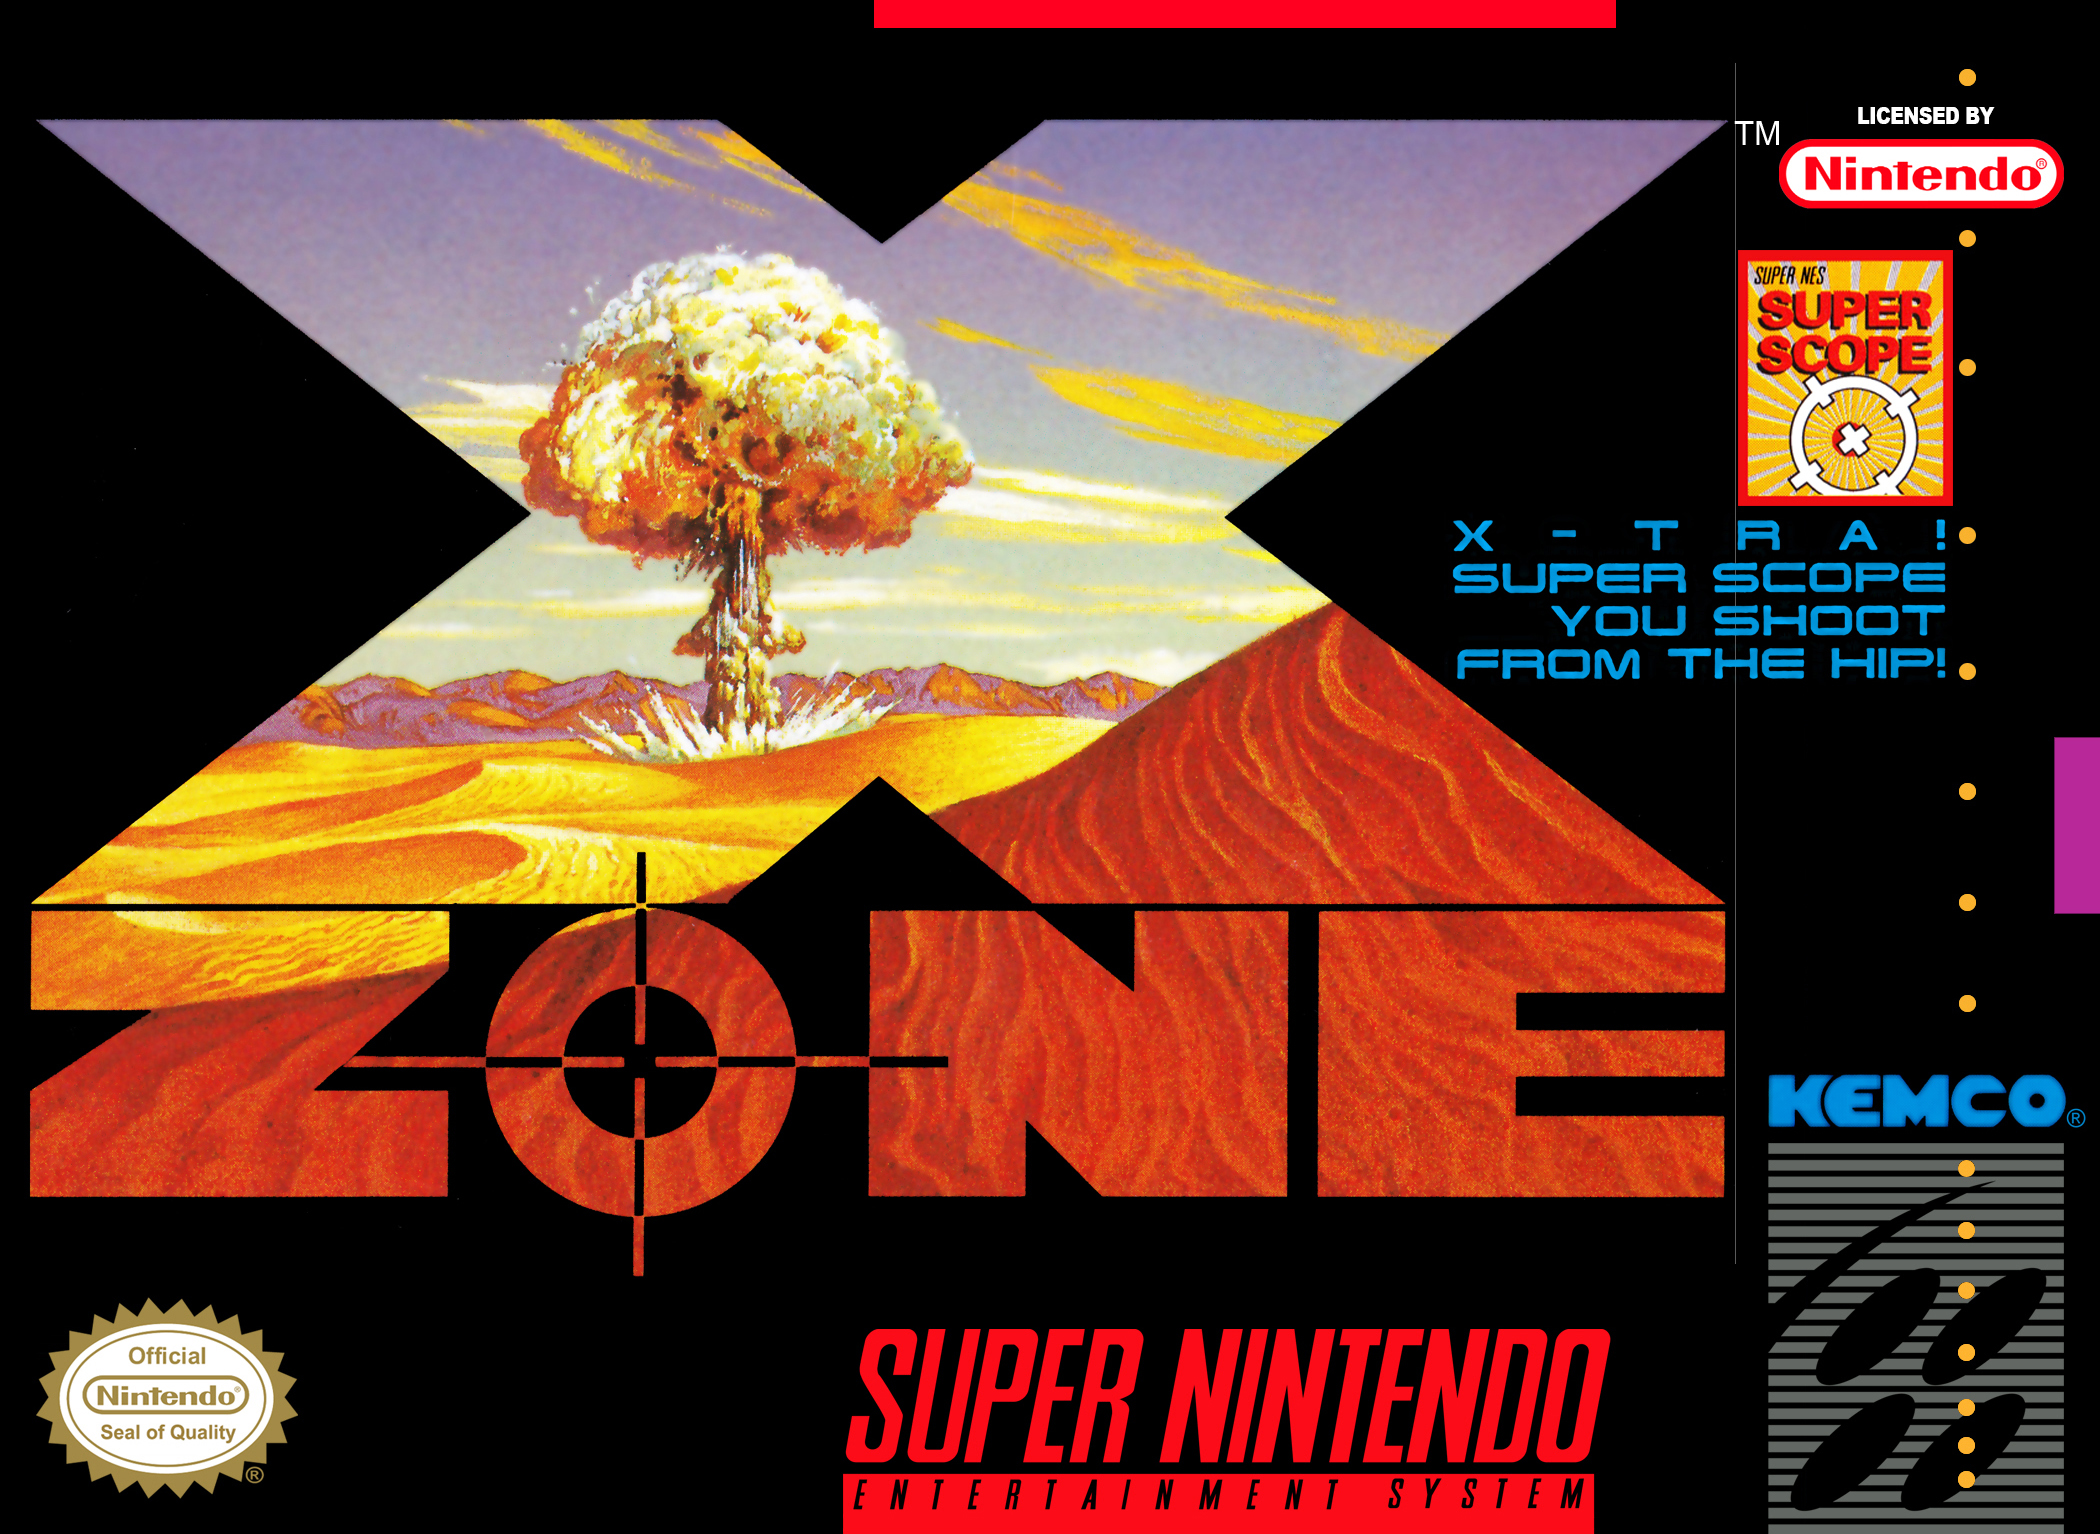 x zone game download free